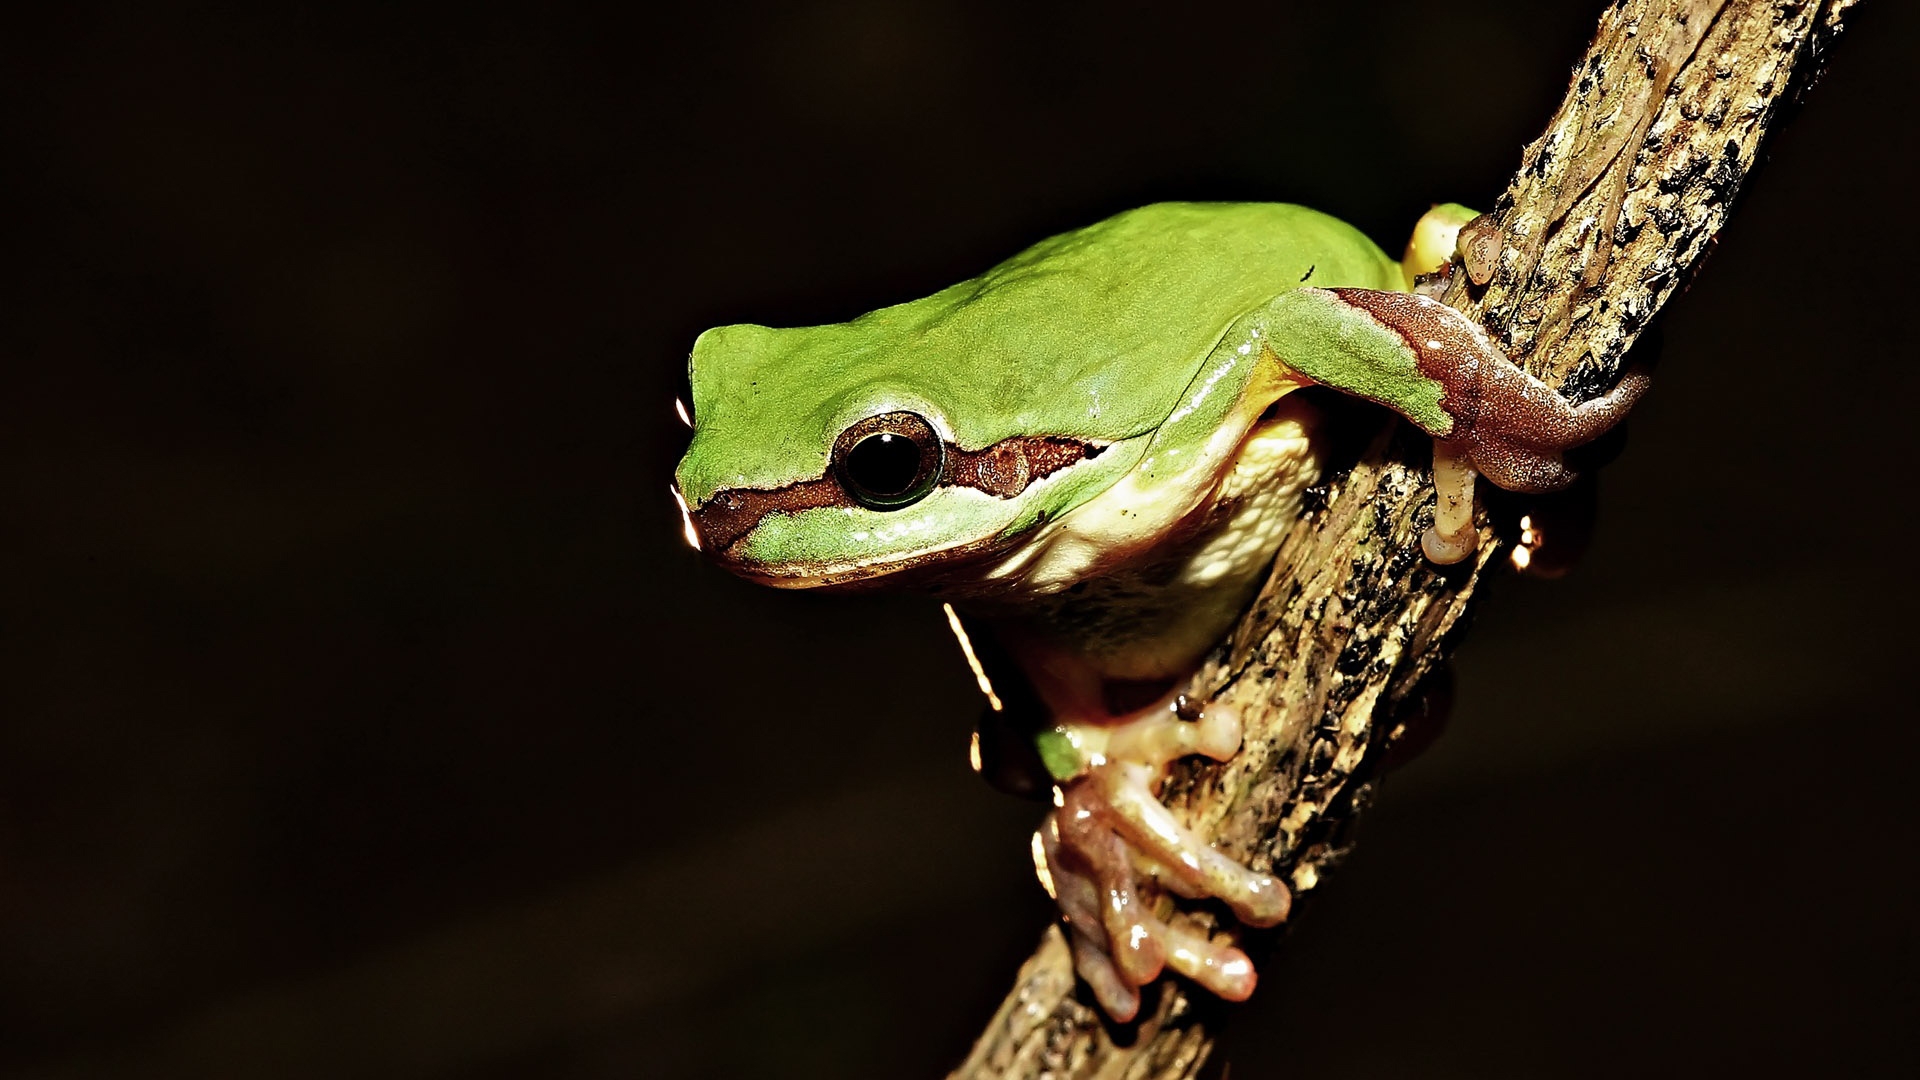 Frog On Tree HD Walls Find Wallpapers 1920x1080